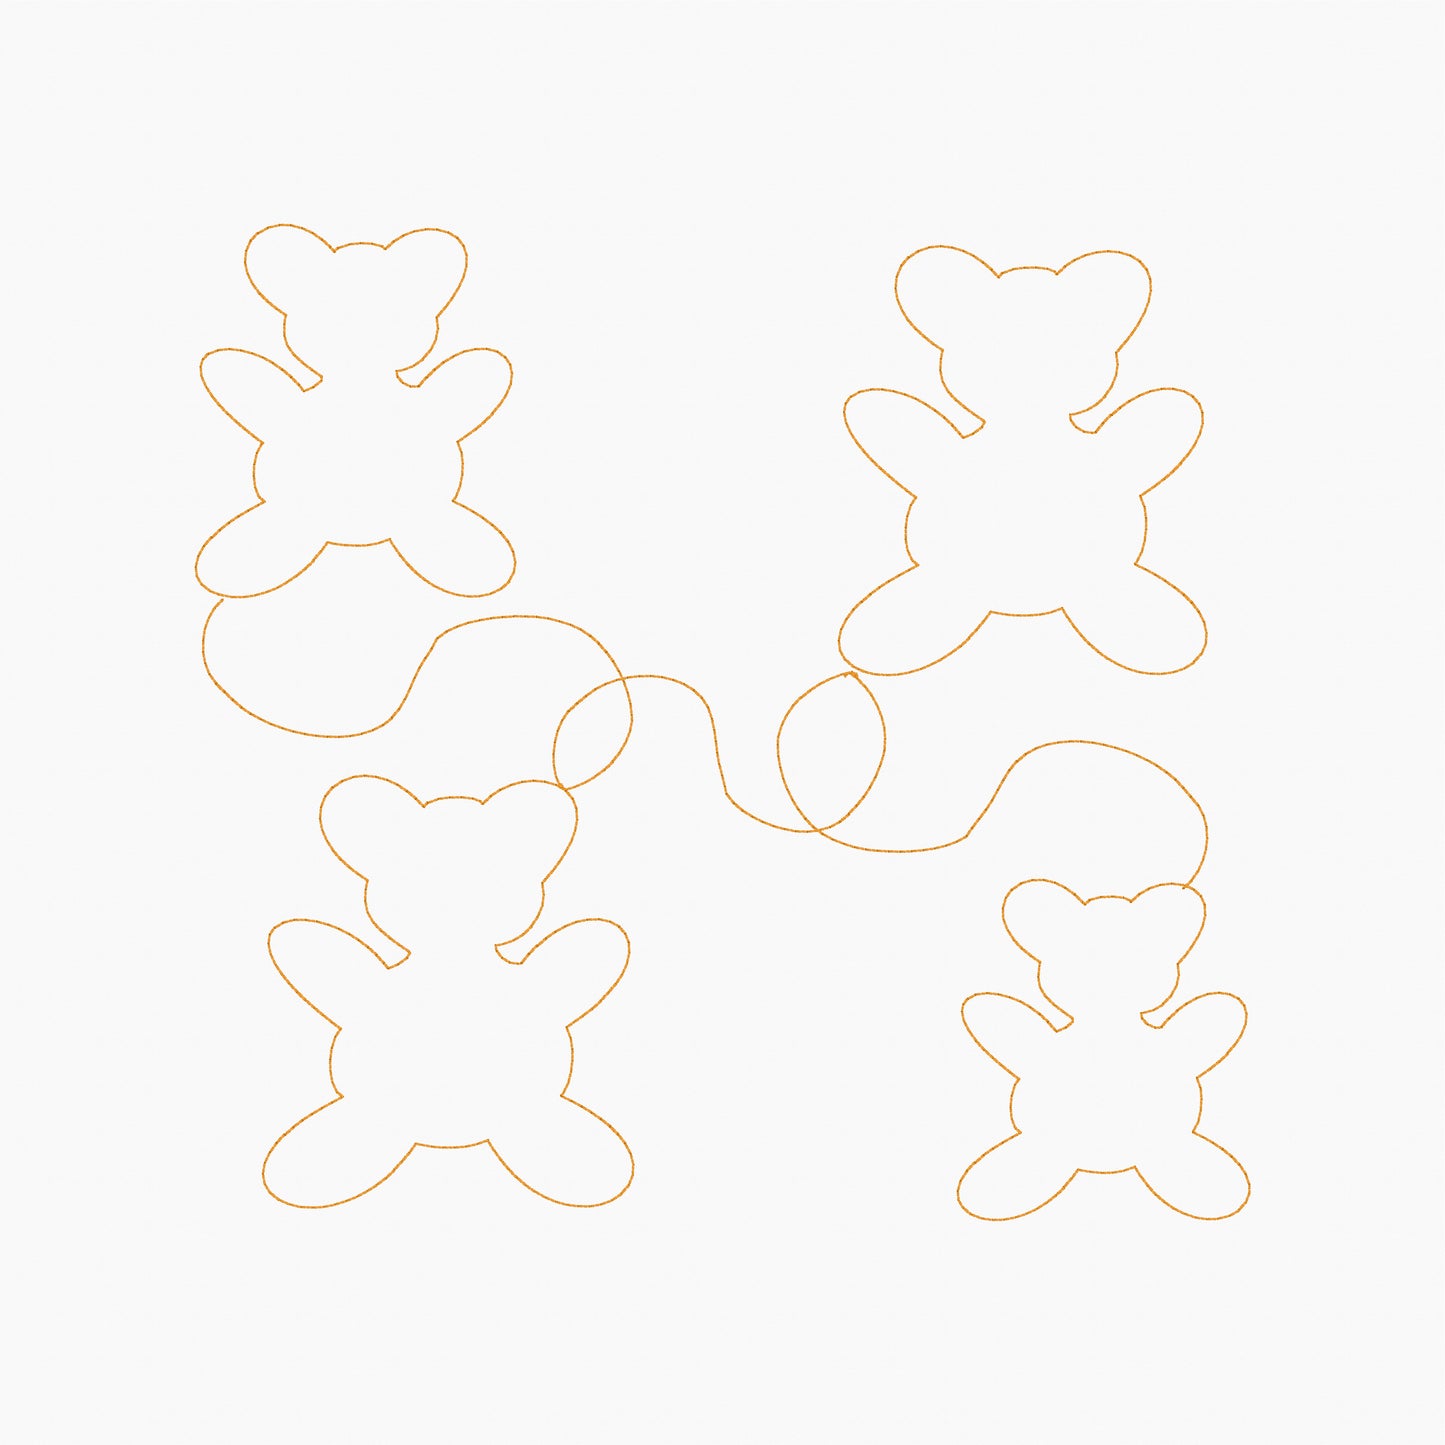 Teddy Bears - In-the-Hoop Quilting Design - 2 Sizes